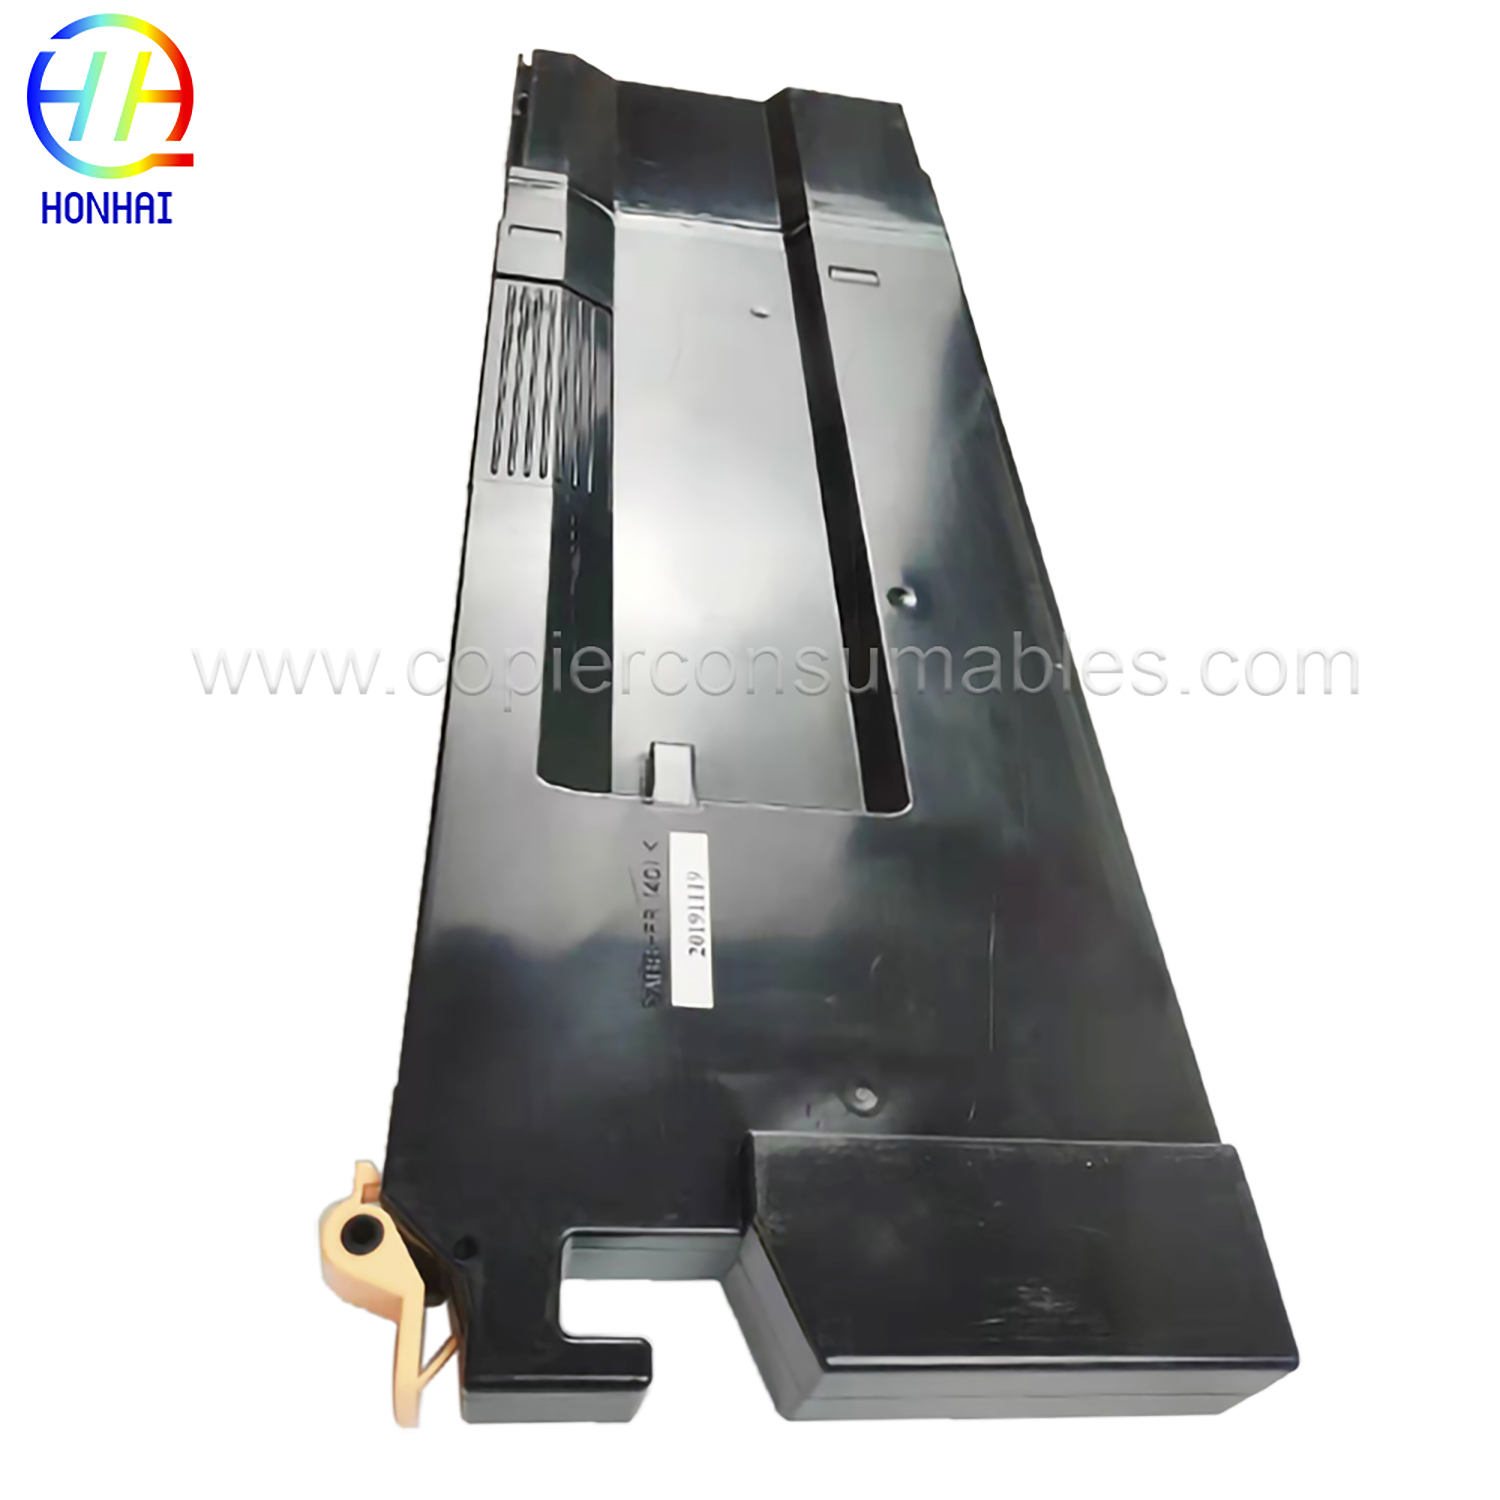 Waste Tone Container Compatible  for Xerox 4110 4127 4590 4595 D110 D125 D136 D95 ED125 ED95A  008R13036 (3) 拷贝